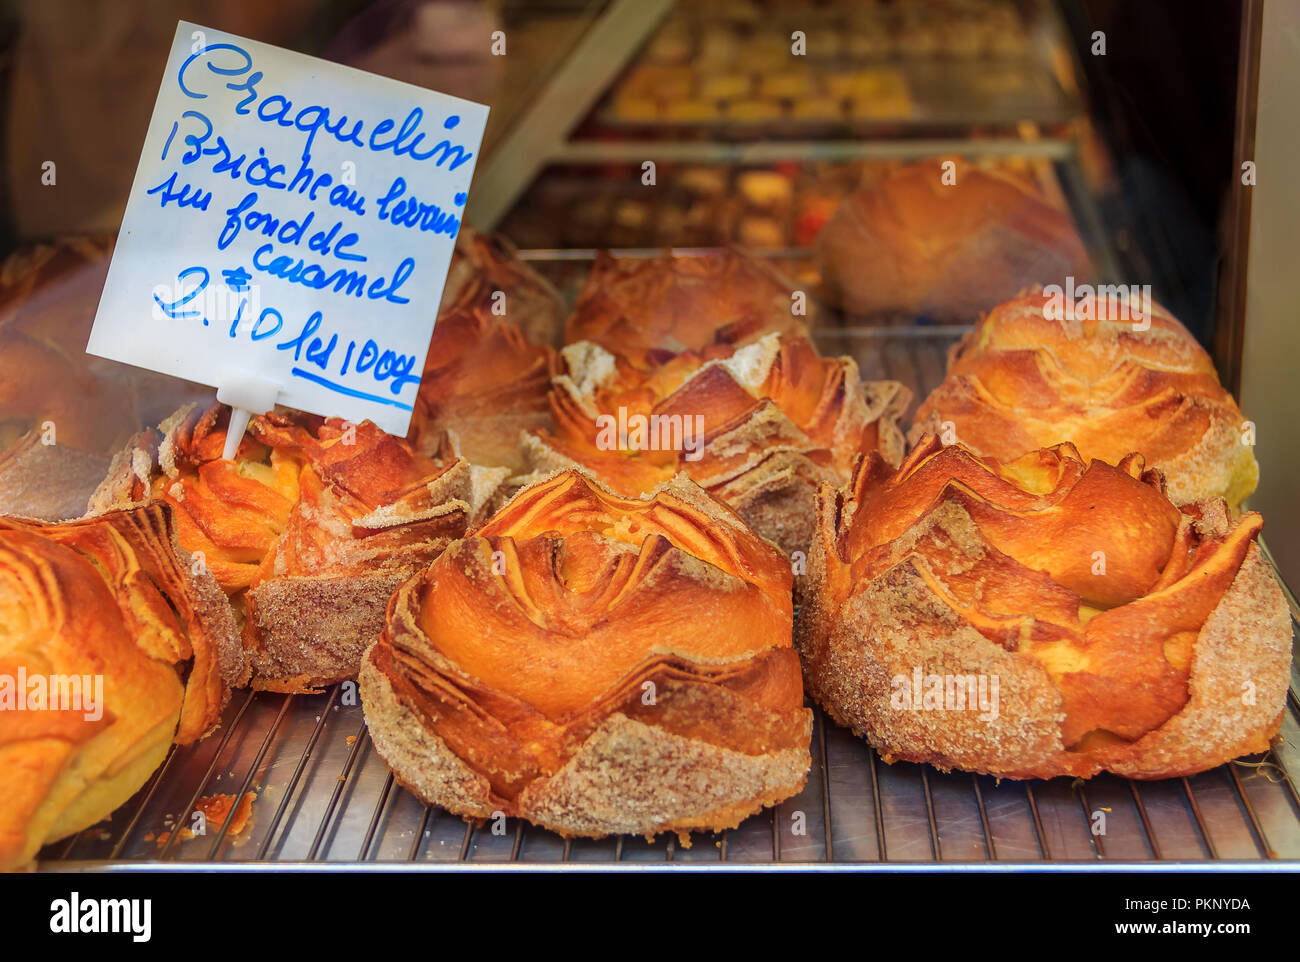 Ornate French craquelin, sugary brioche with a crispy top and caramel filling on display at a bakery in Cannes, France Stock Photo